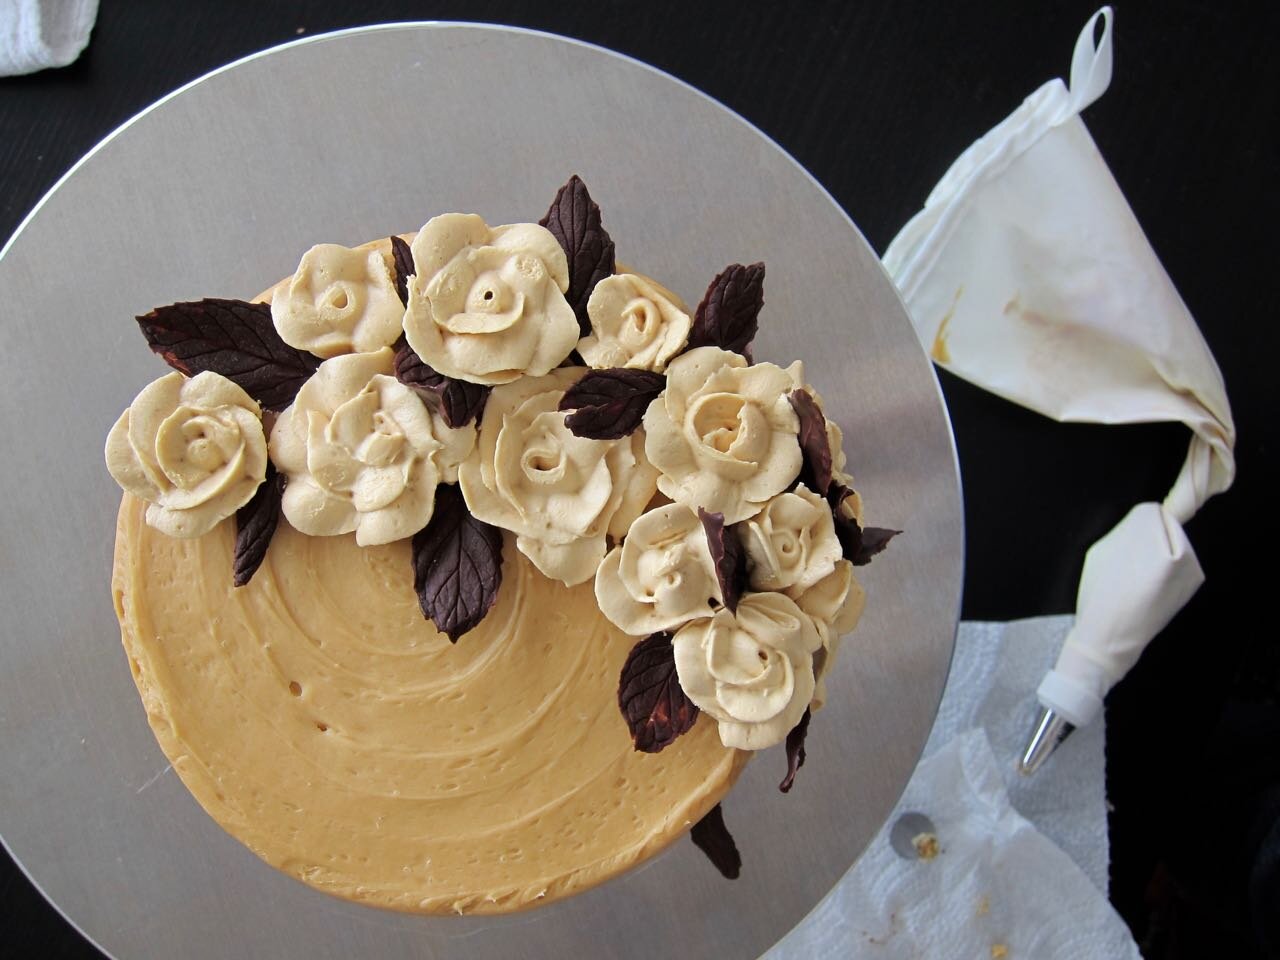 chocolate mint leaves and frosting roses.jpg